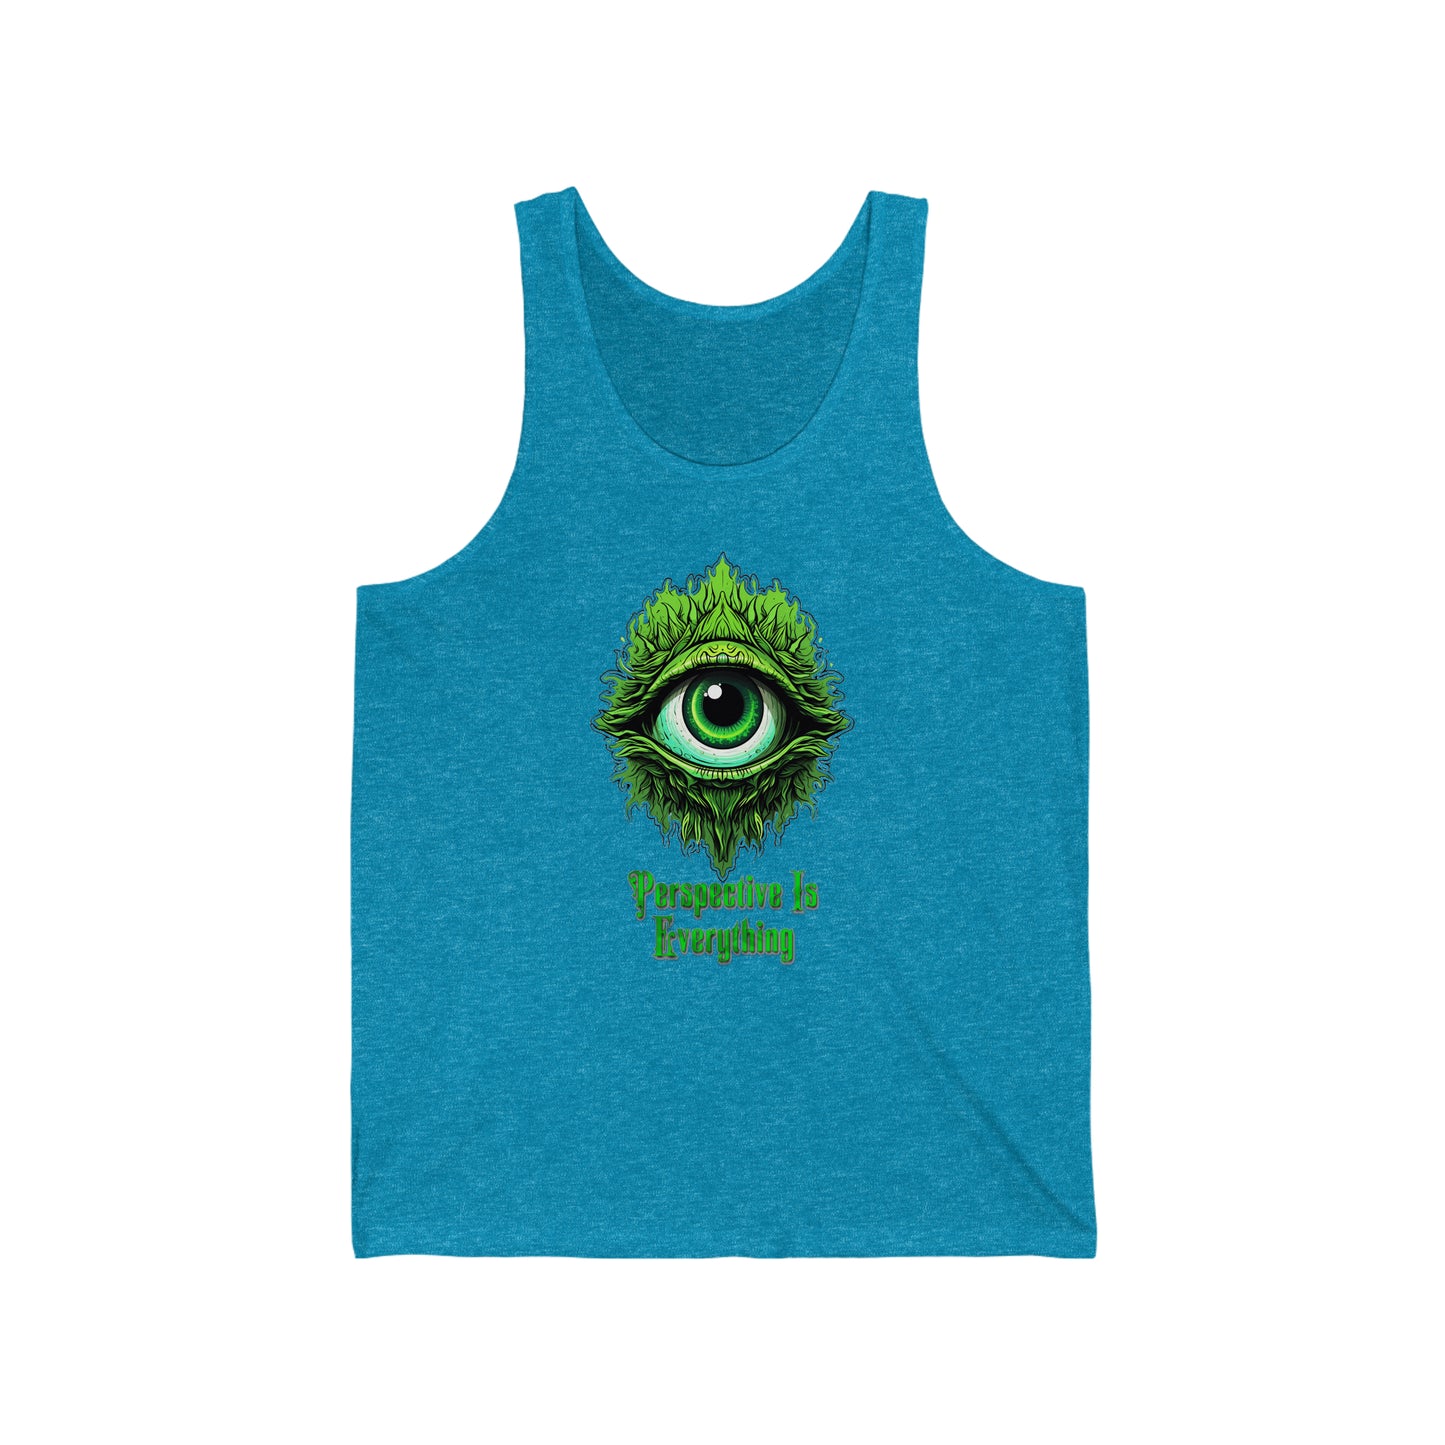 Perspective is Everything: Green | Unisex Jersey Tank